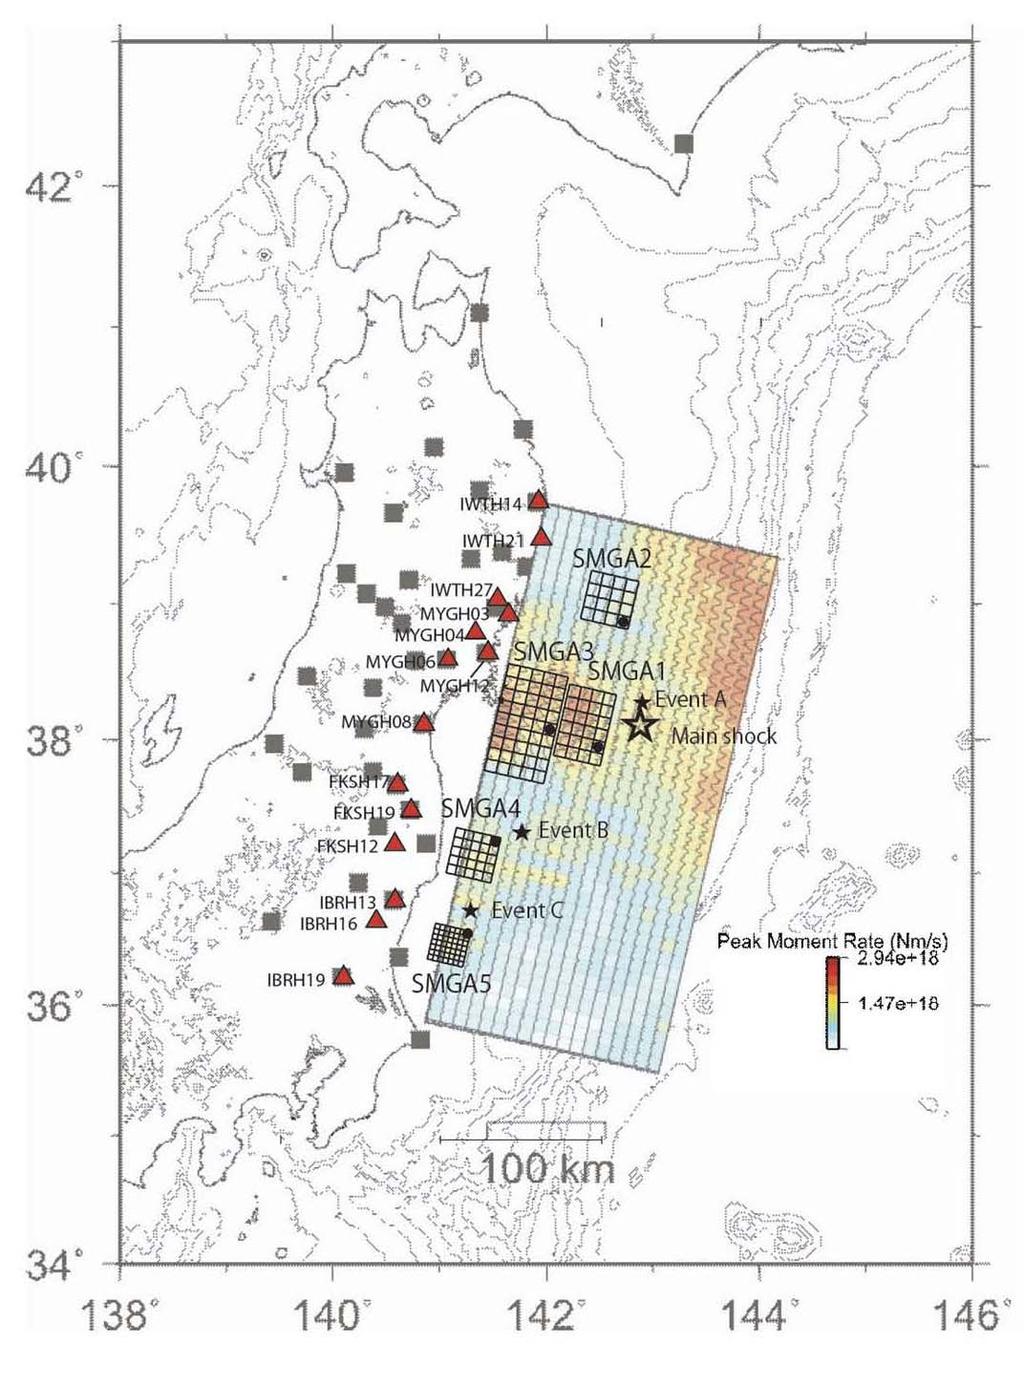 2005, was used for Asp5 (SMGA) and the data of the Mj6.4 earthquake that occurred off Miyagi Prefecture at 3:16 on March 10, 2011, (an aftershock of the March 9 event) was used for all others.